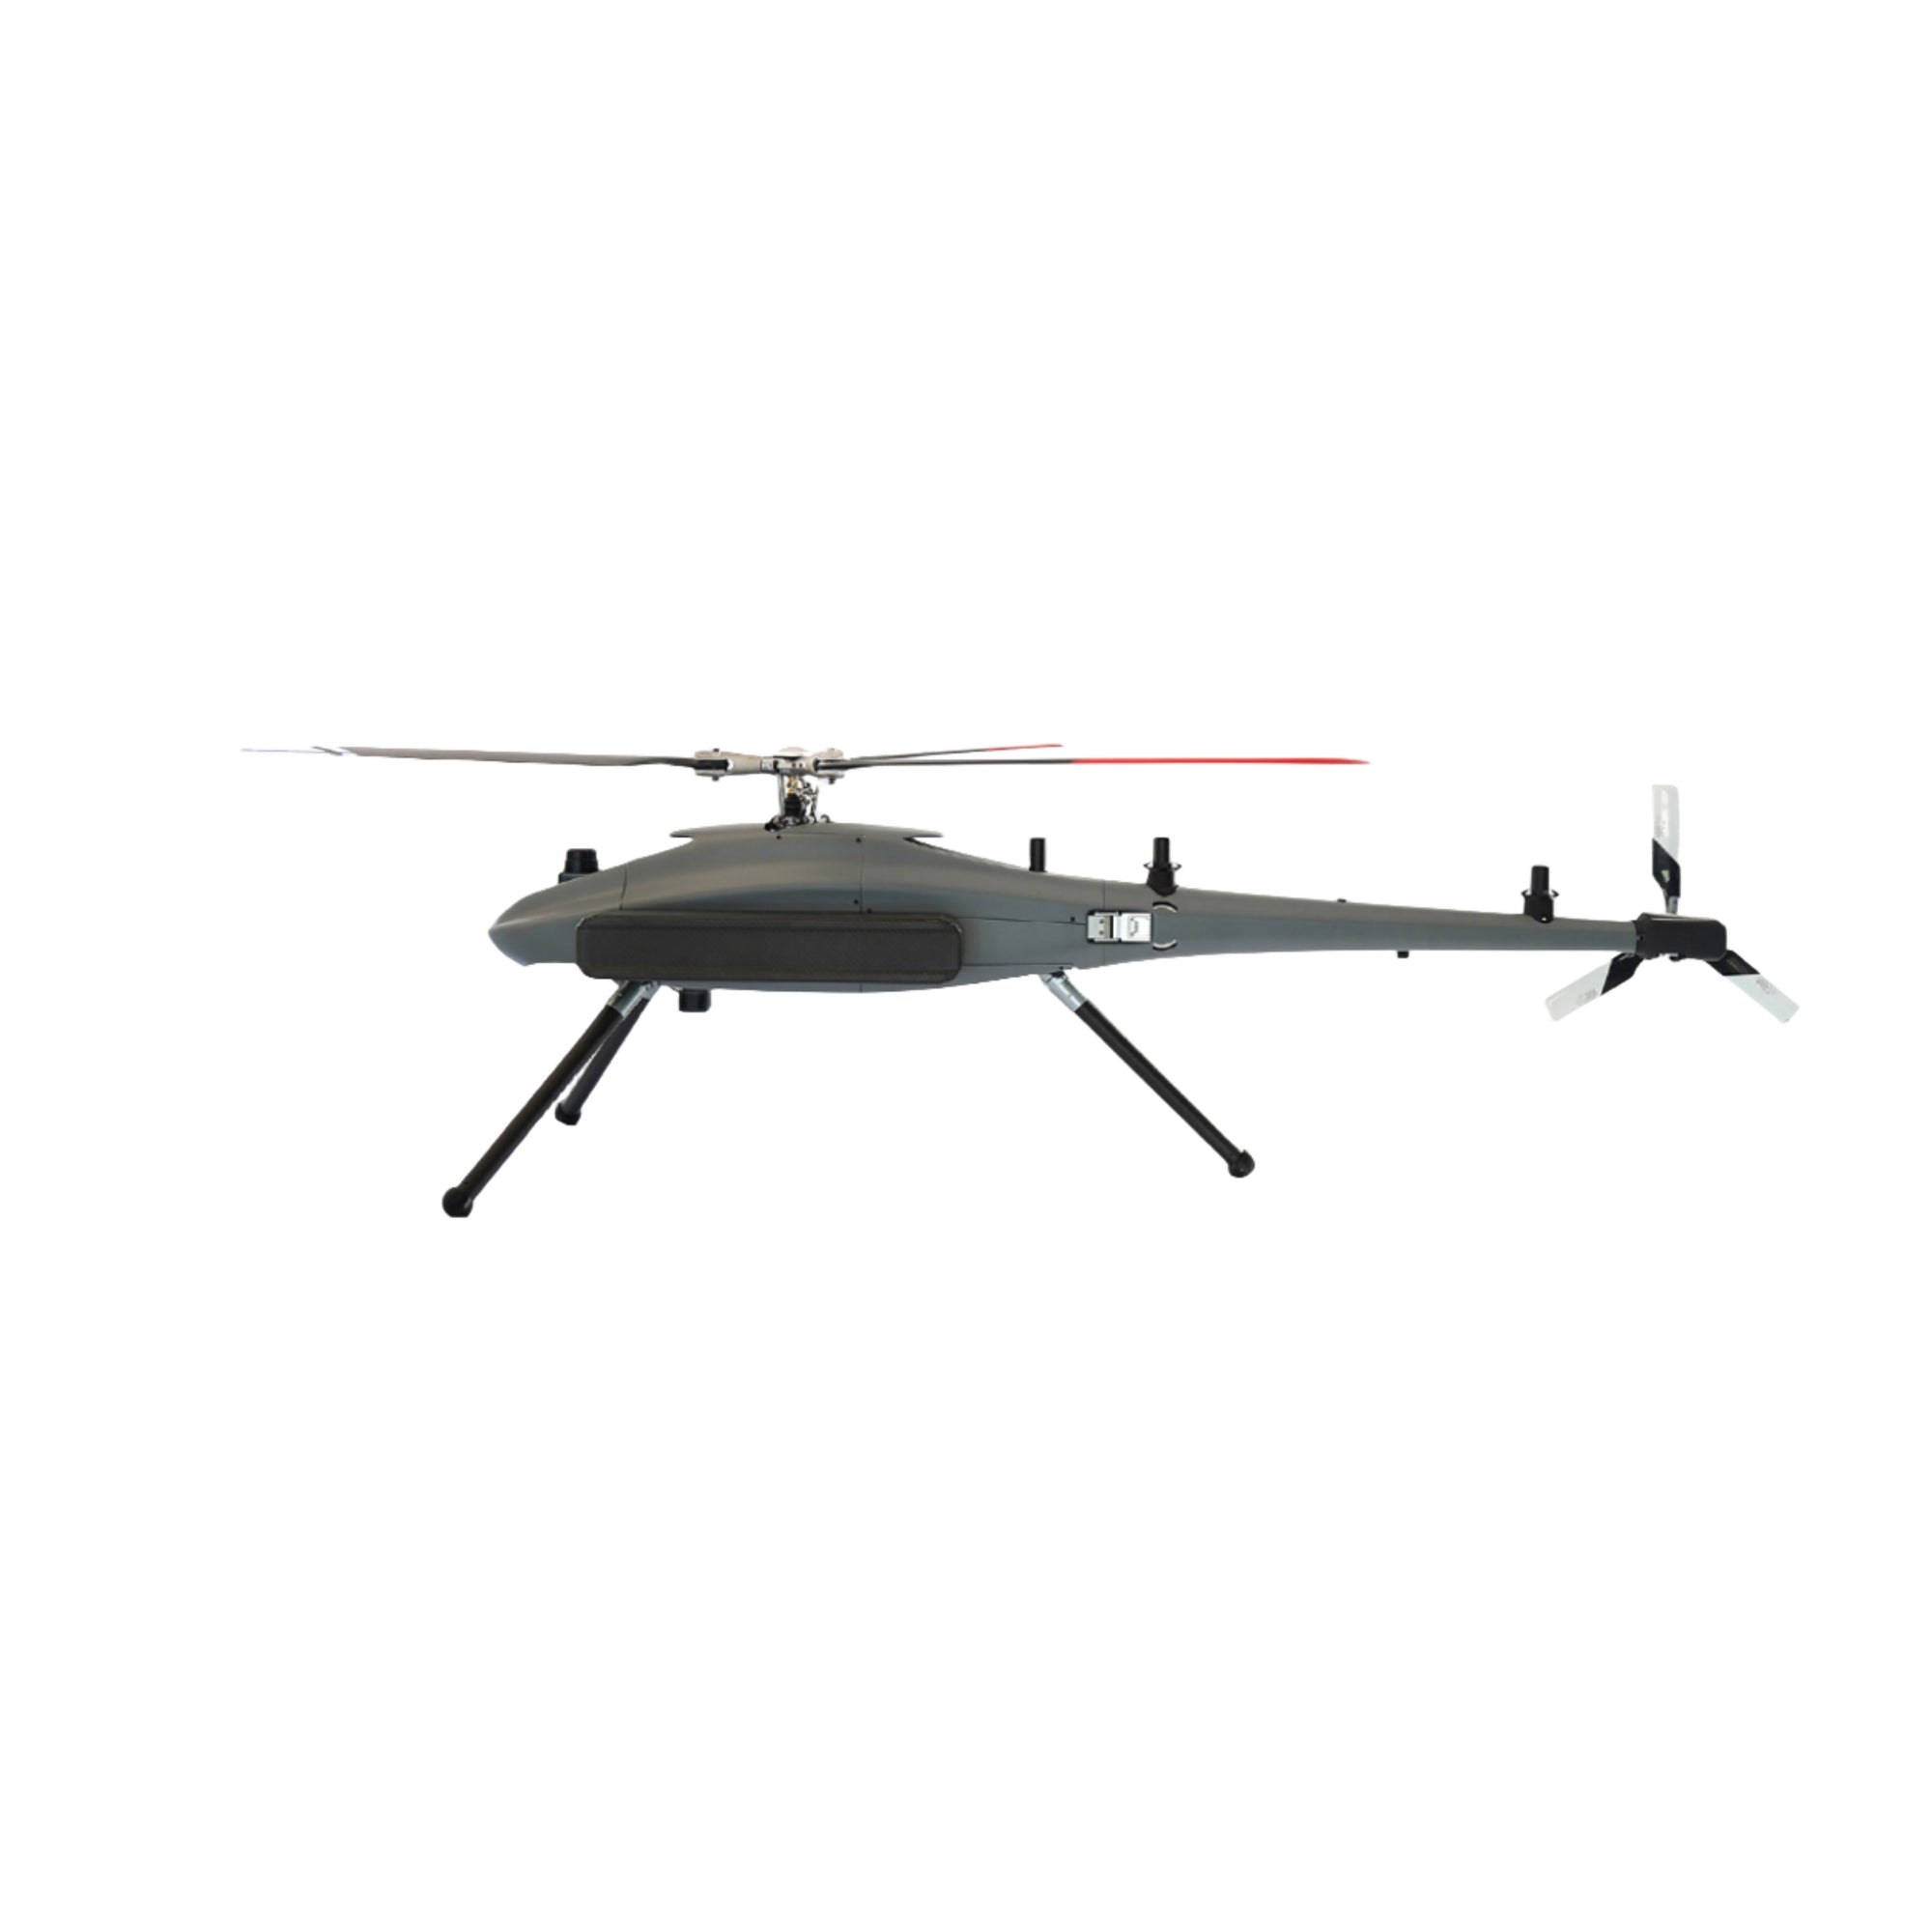 Dragonfly-10 Electric Unmanned Helicopters-7kg Mission Payload 50 Mins - Unmanned RC